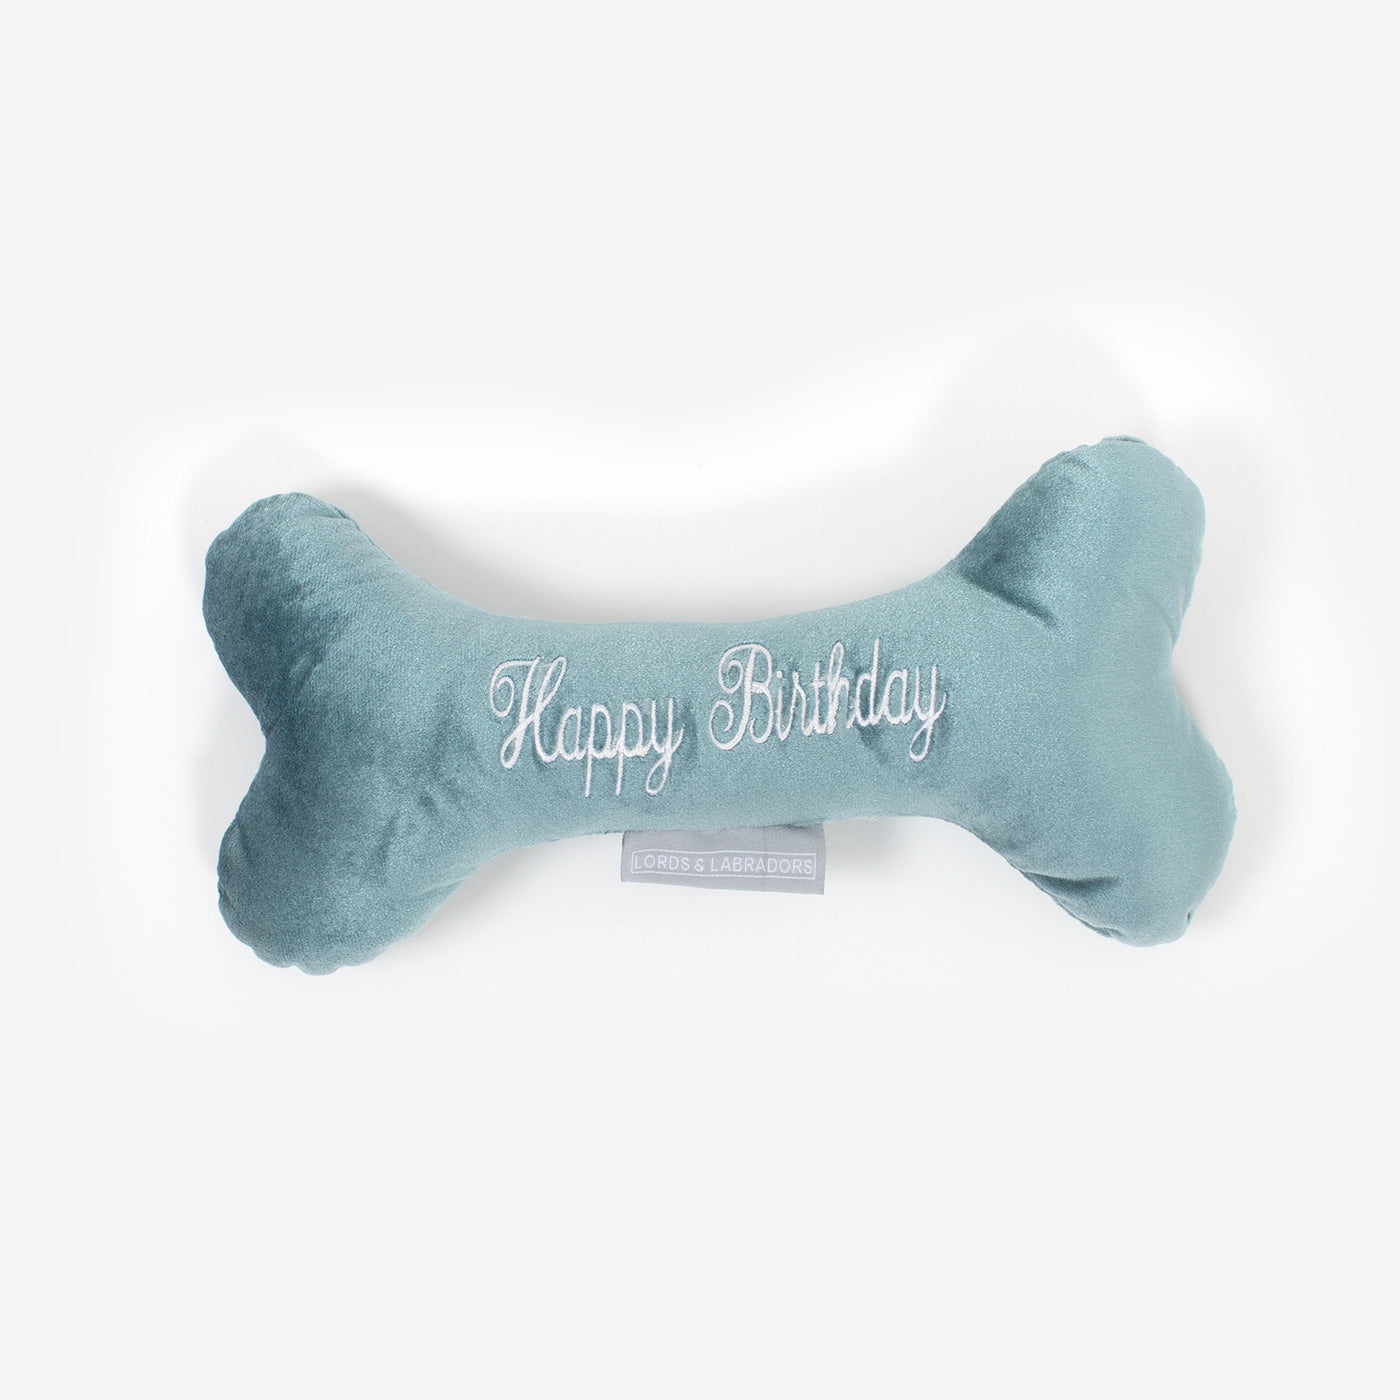 [color:duck egg velvet] Present The Perfect Pet Playtime With Our Luxury 'Happy Birthday' Dog Bone Toy, In Stunning Duck Egg Velvet! Available Now at Lords & Labradors US